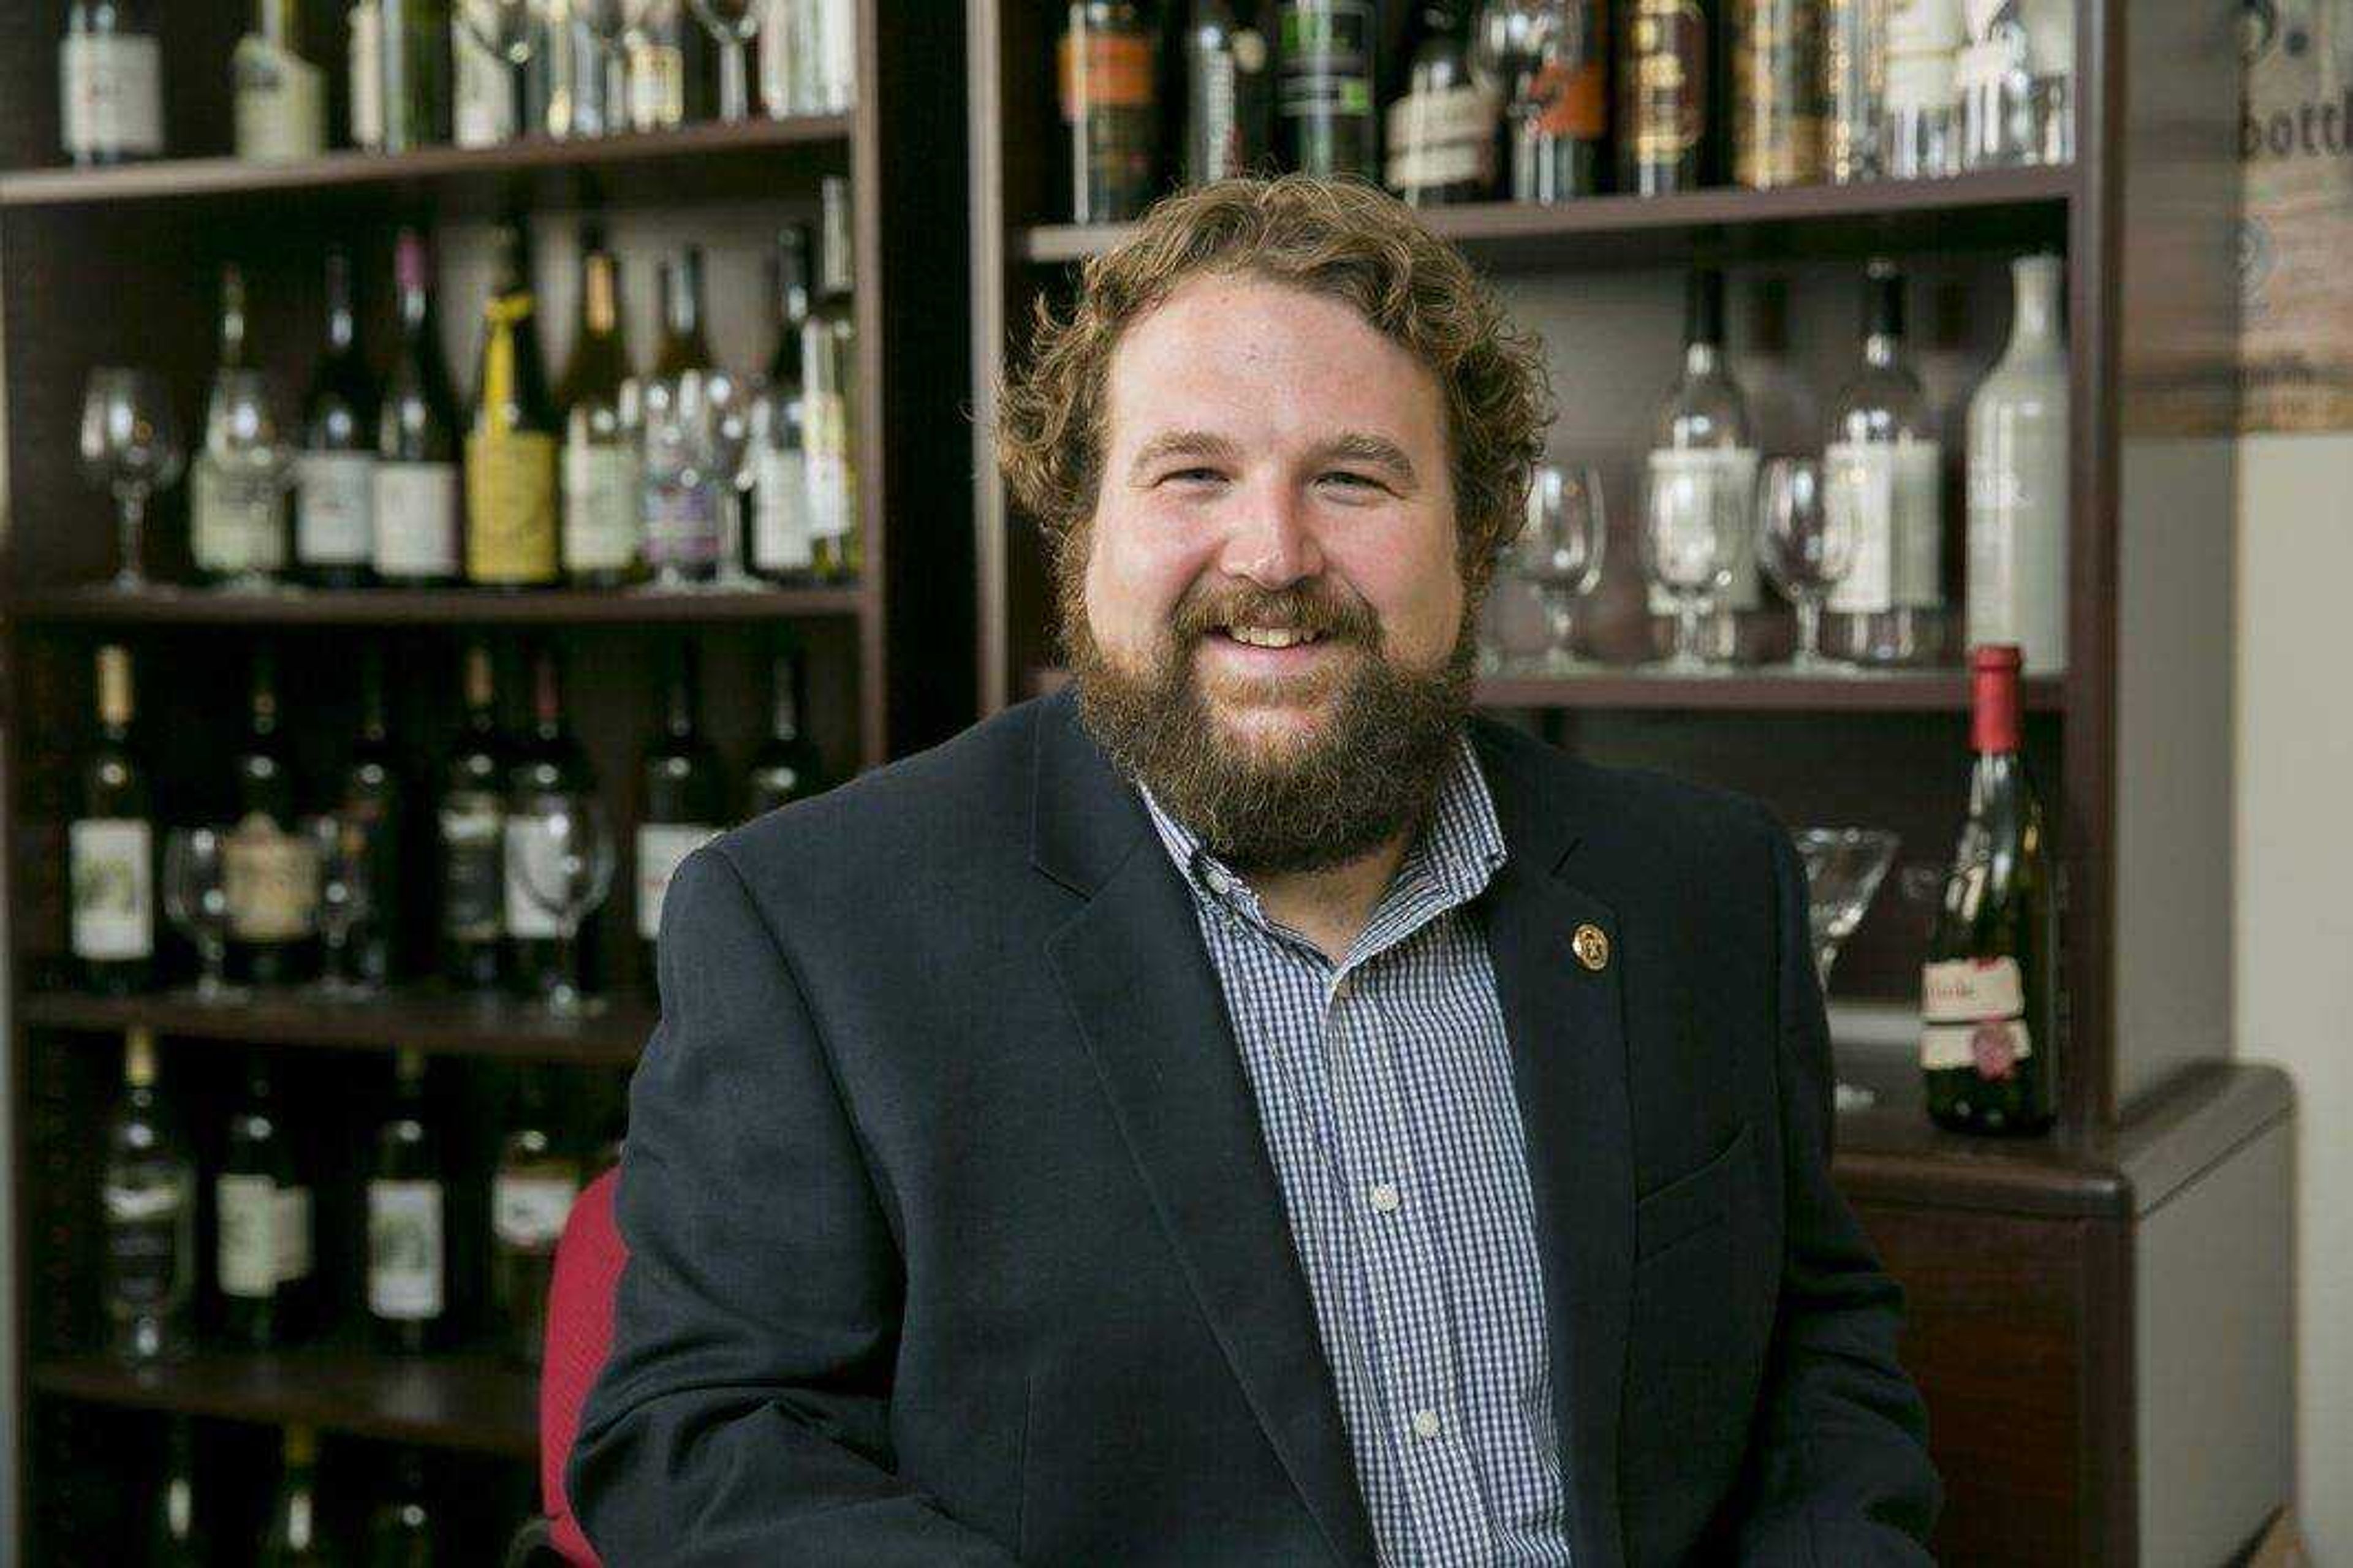 Dr. Nicholas Johnston is a new professor in the Department of Hospitality Management. Submitted photo